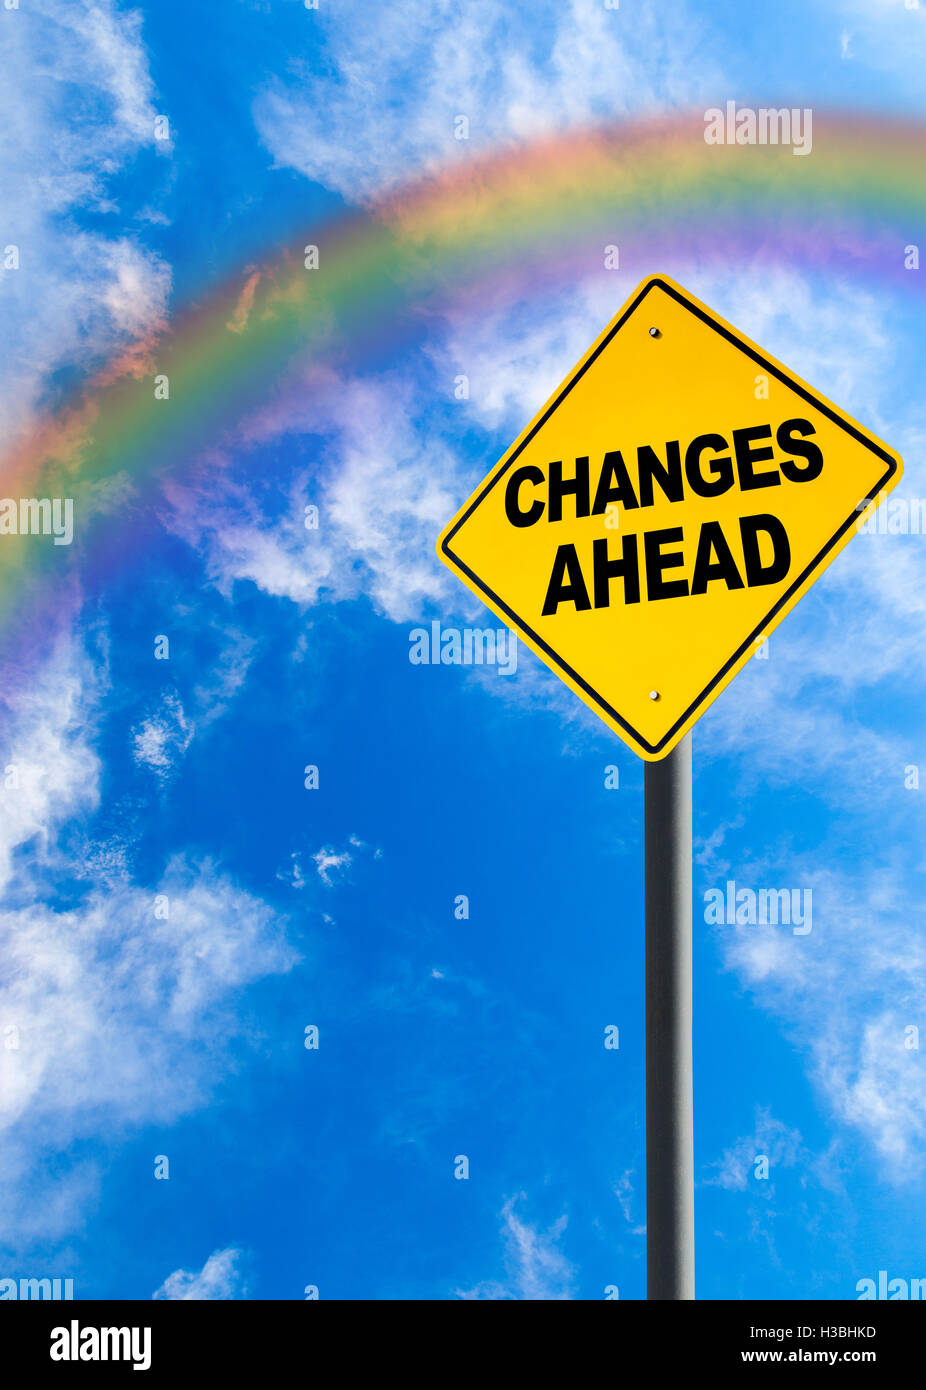 Changes Ahead sign against a blue sky with rainbow and copy space. Concept of situation changing for the better. Vertical orient Stock Photo